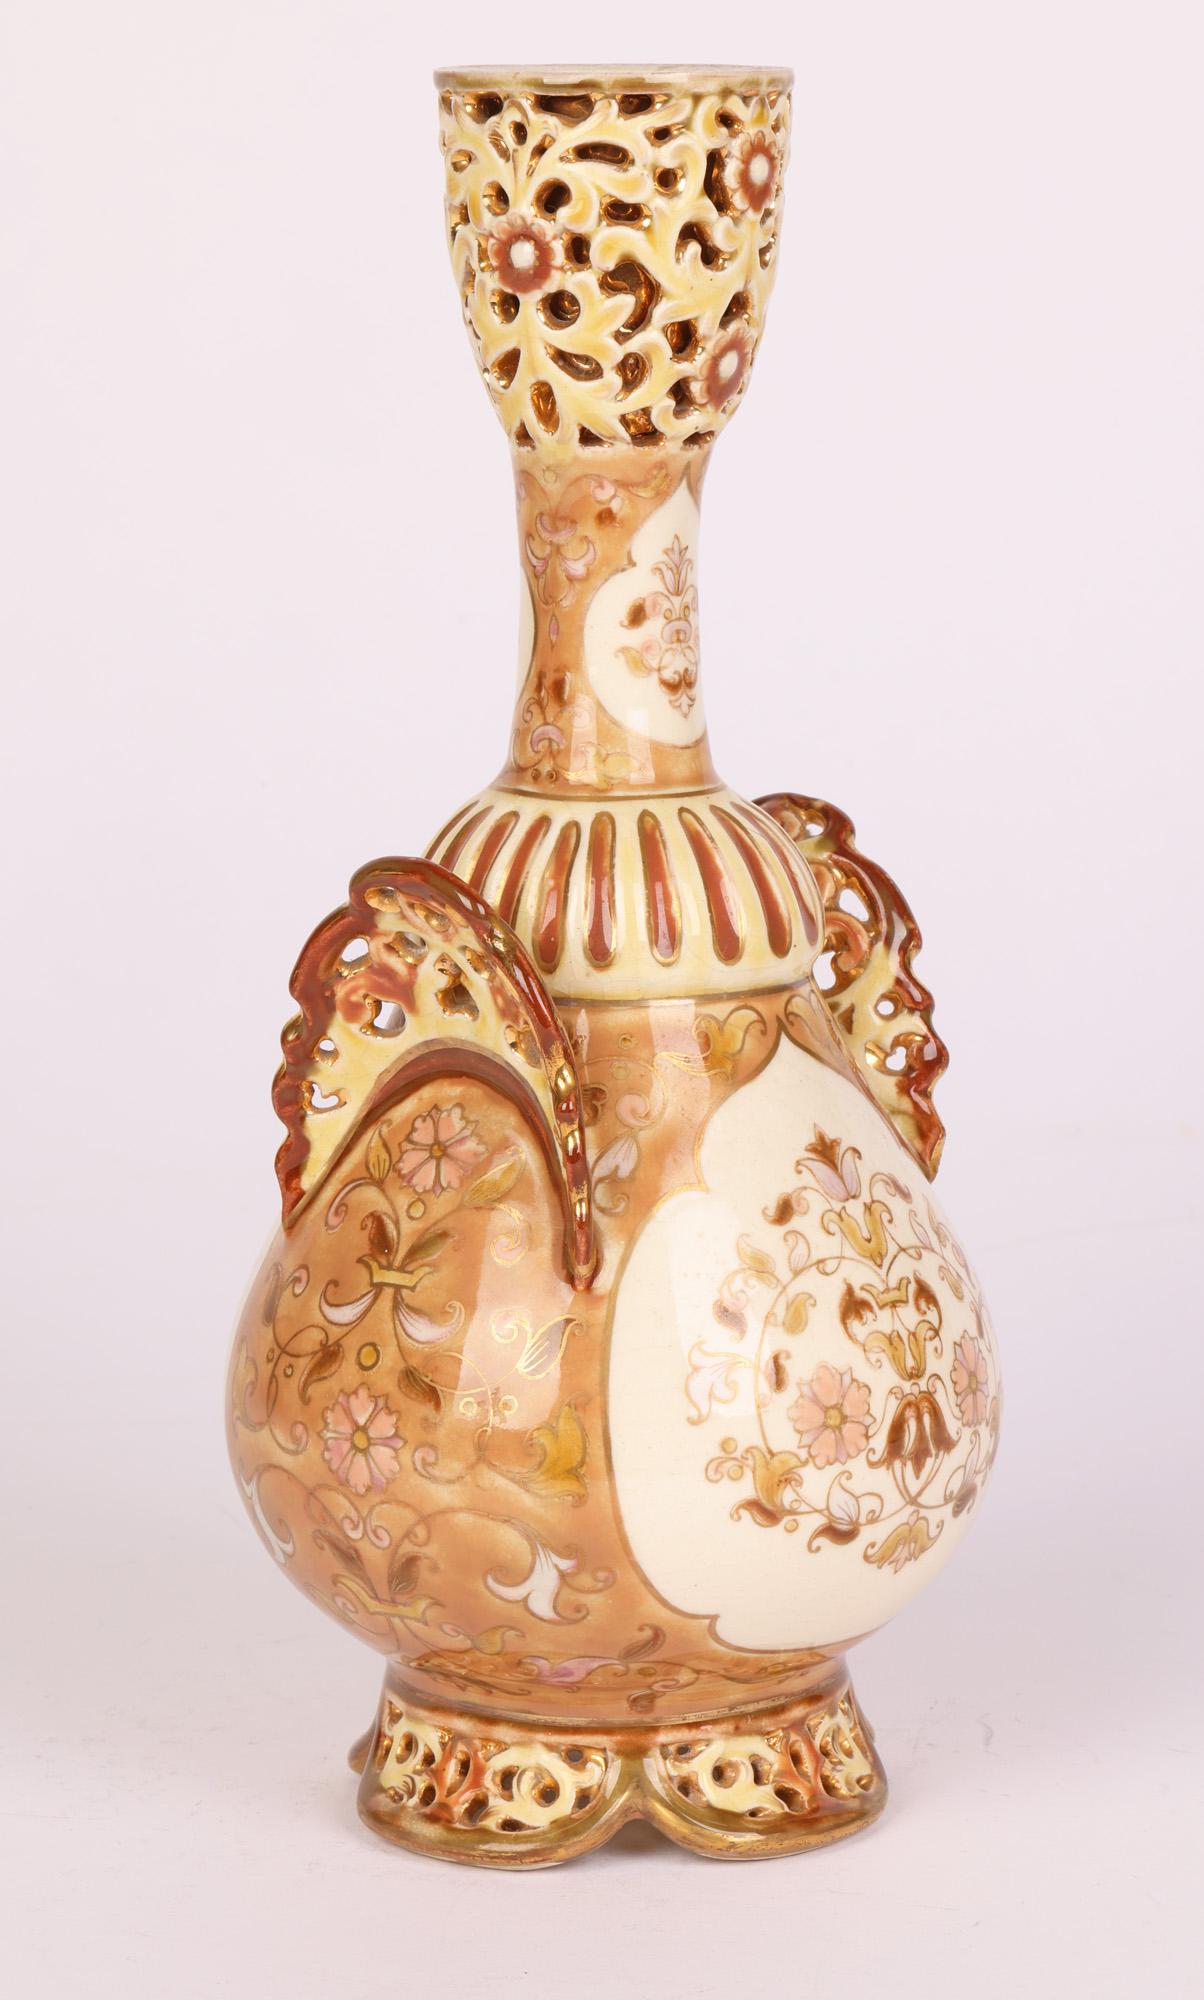 Zsolnay Hungarian Islamic Influence Floral Painted Porcelain Vase For Sale 4